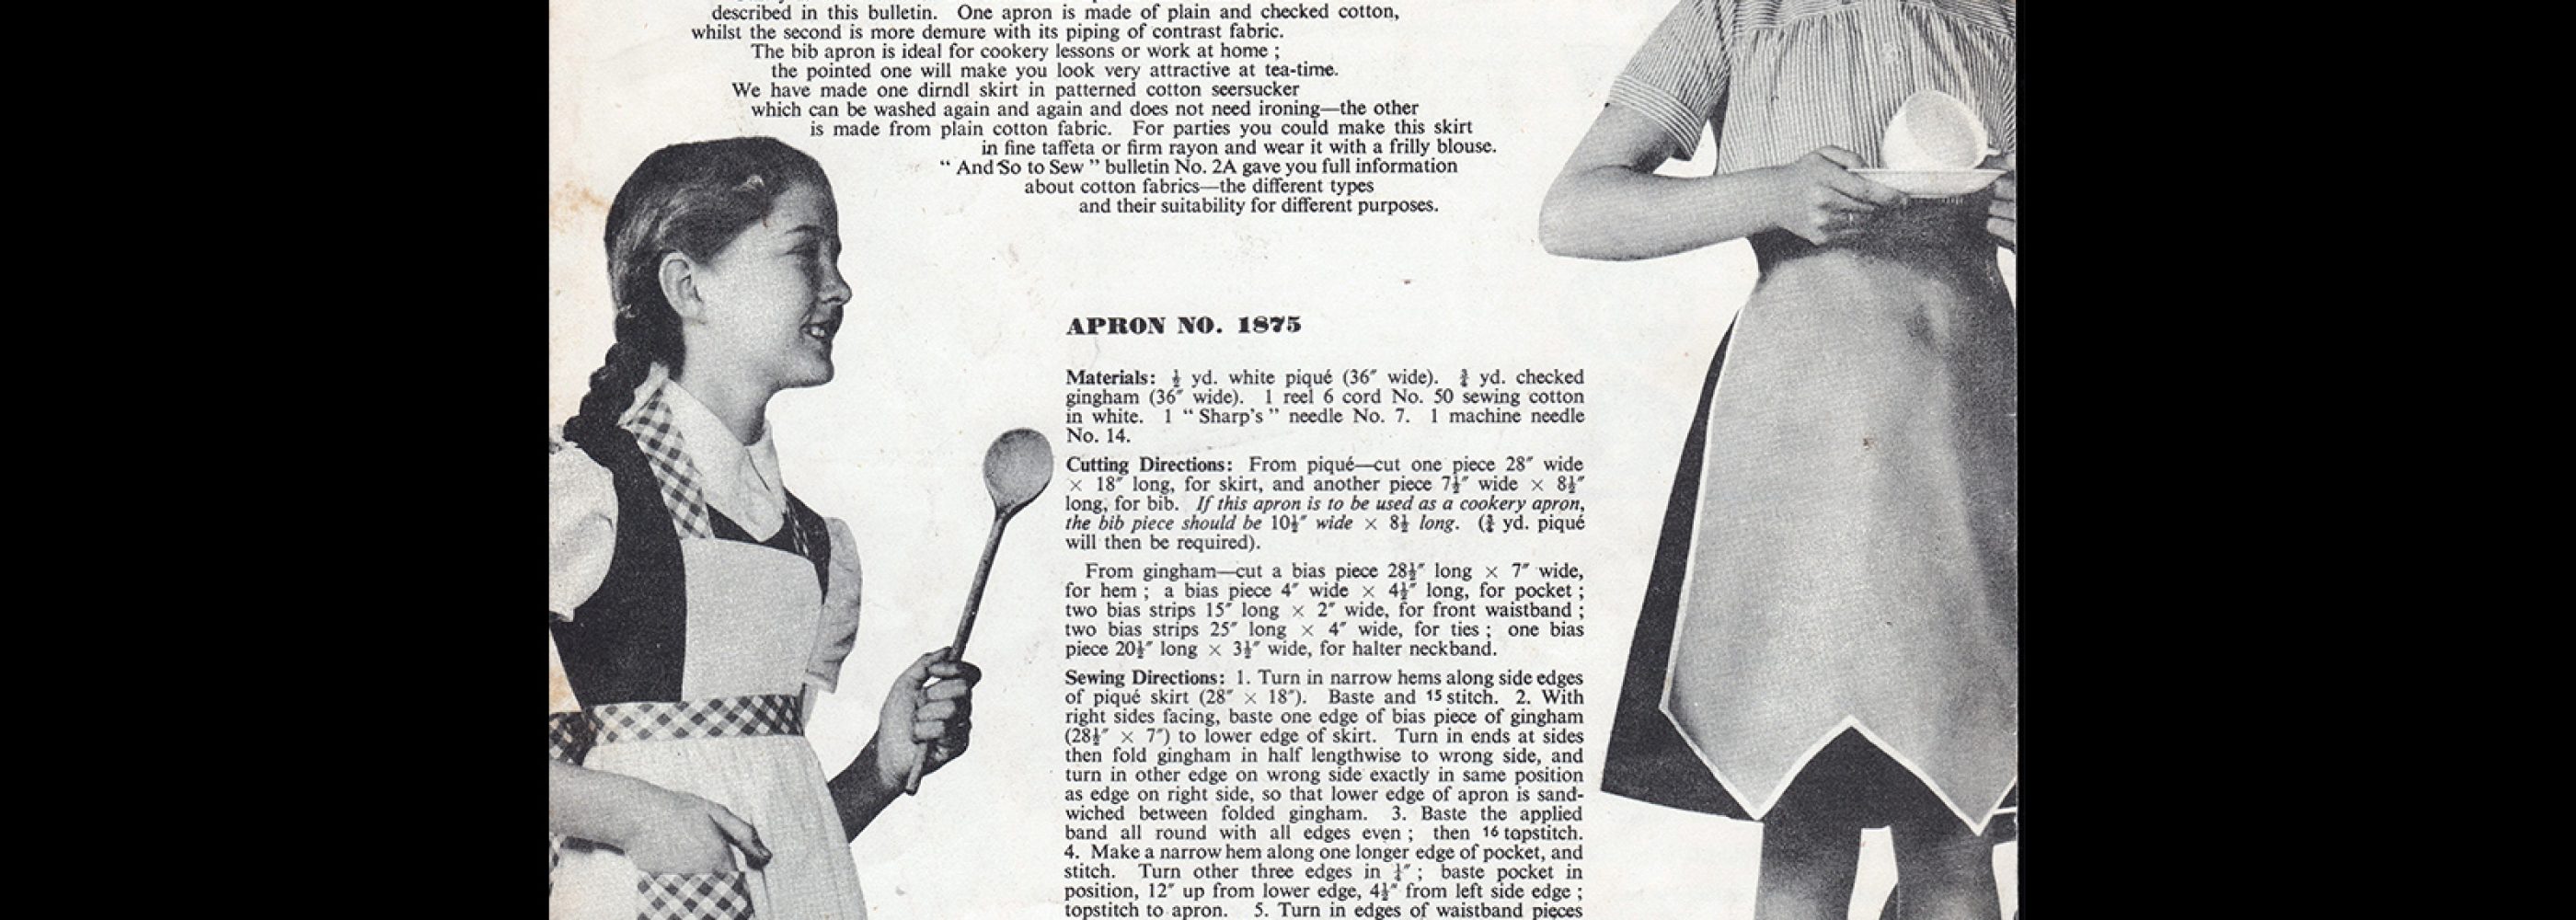 And So To Sew Bulletin 3a, 1950s